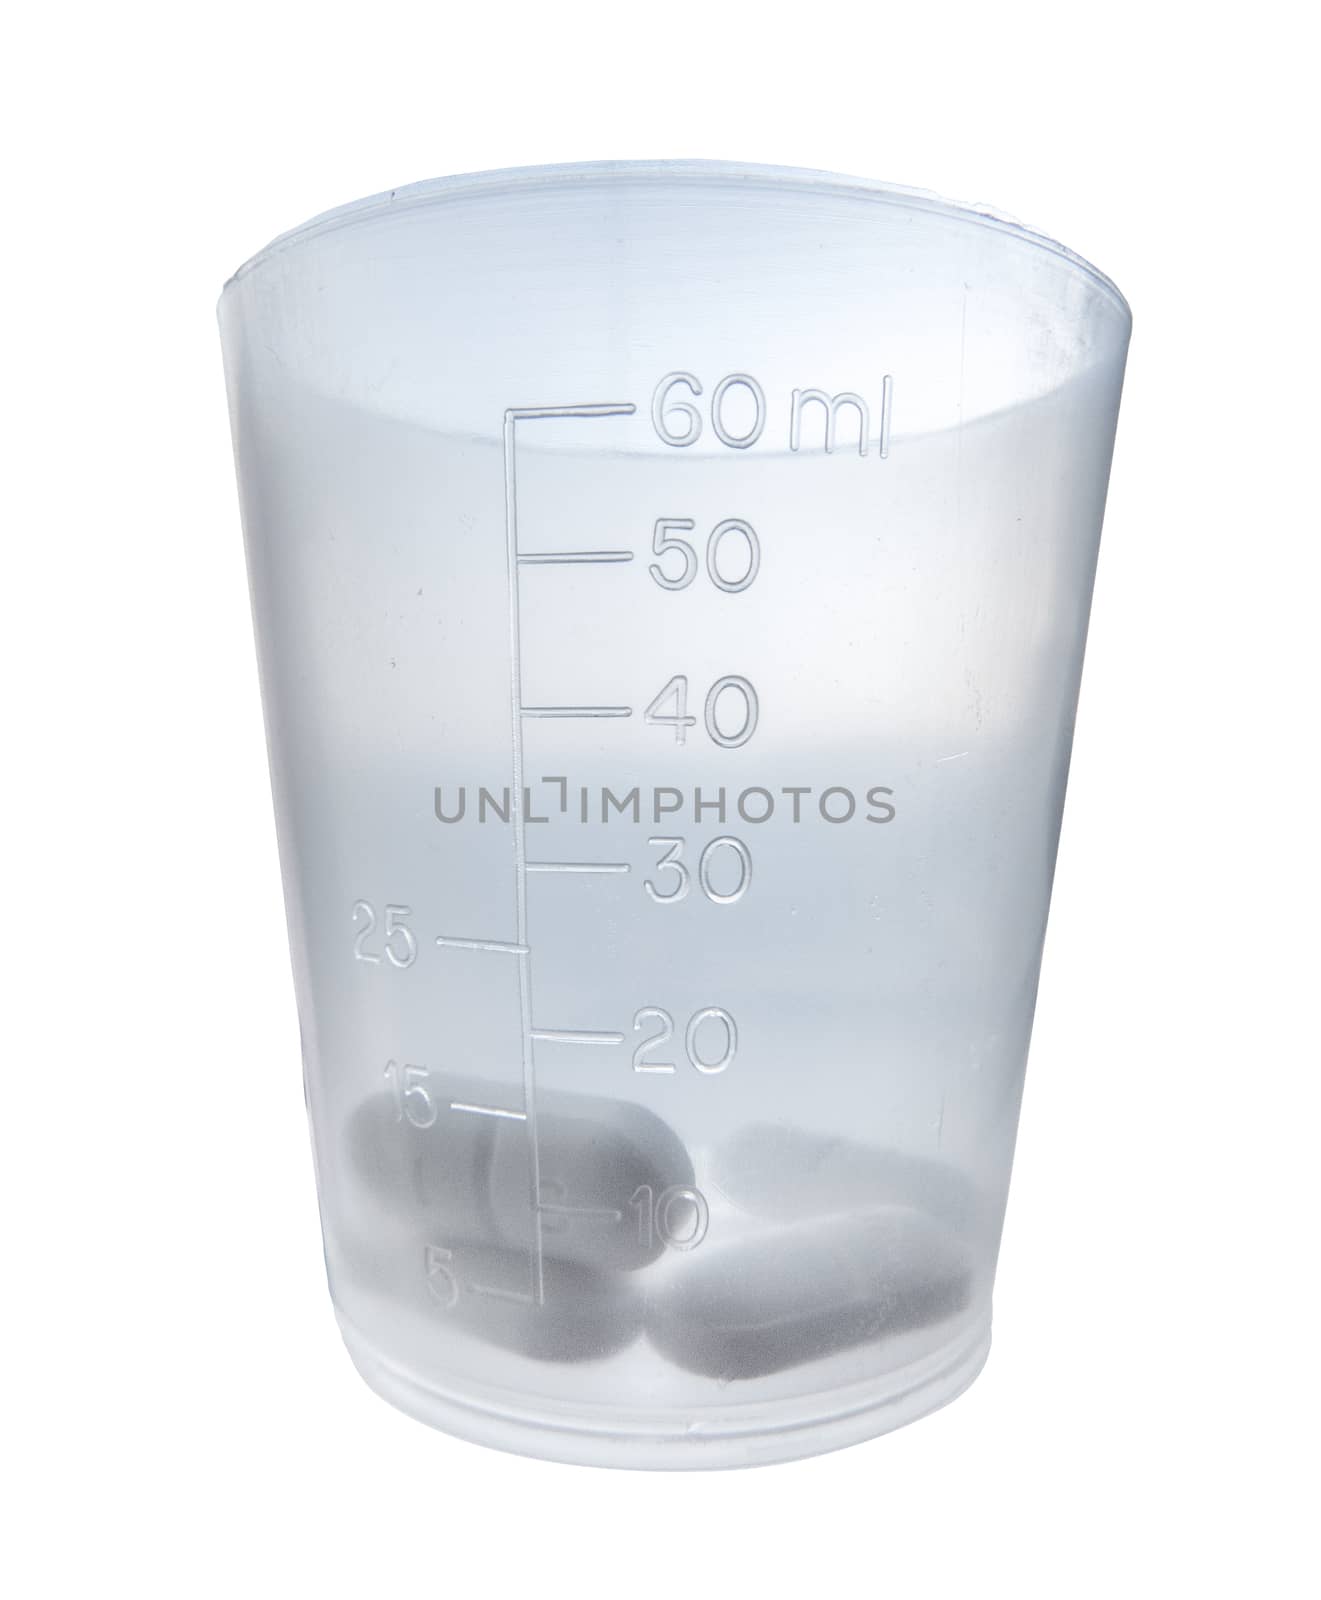 Isolated Medicine In A Plastic Medical Measuring Cup